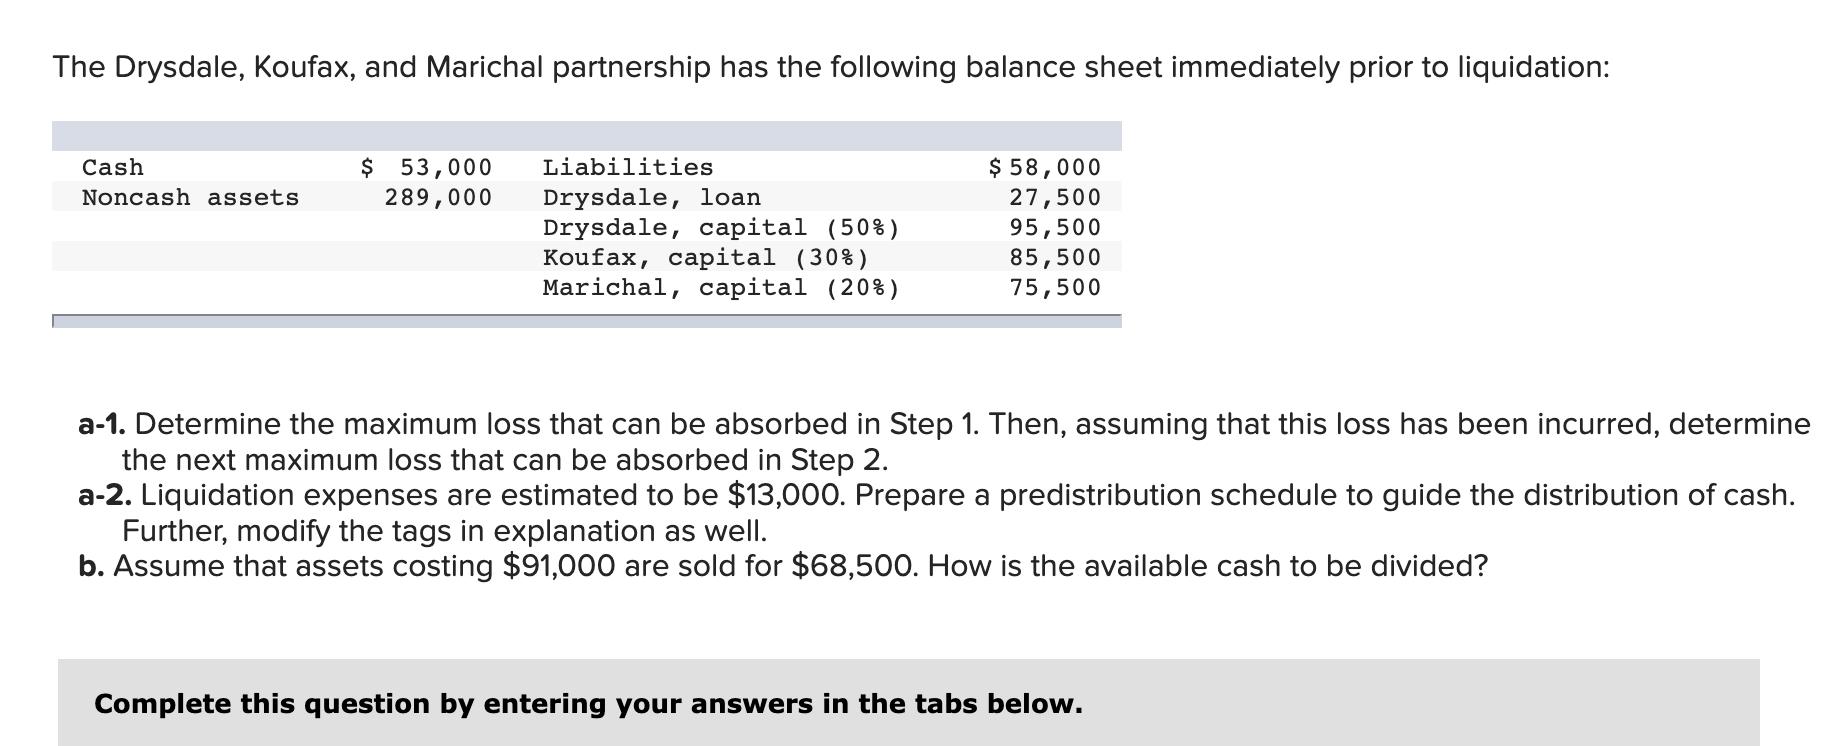 The Drysdale, Koufax, and Marichal partnership has the following balance sheet immediately prior to